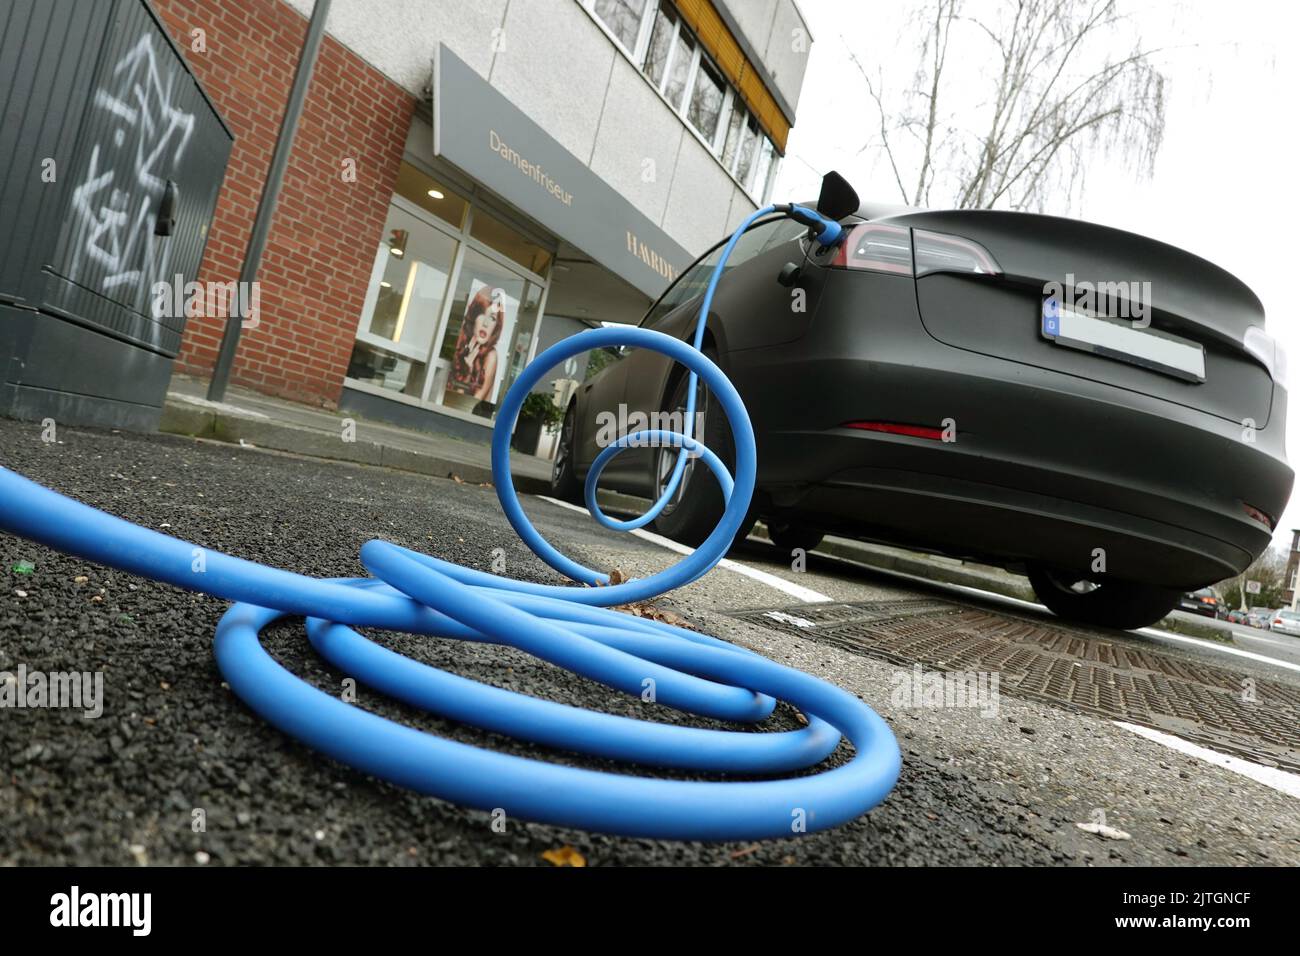 Car at a charging station with blue charge cable, Germany, North Rhine-Westphalia, Cologne Stock Photo